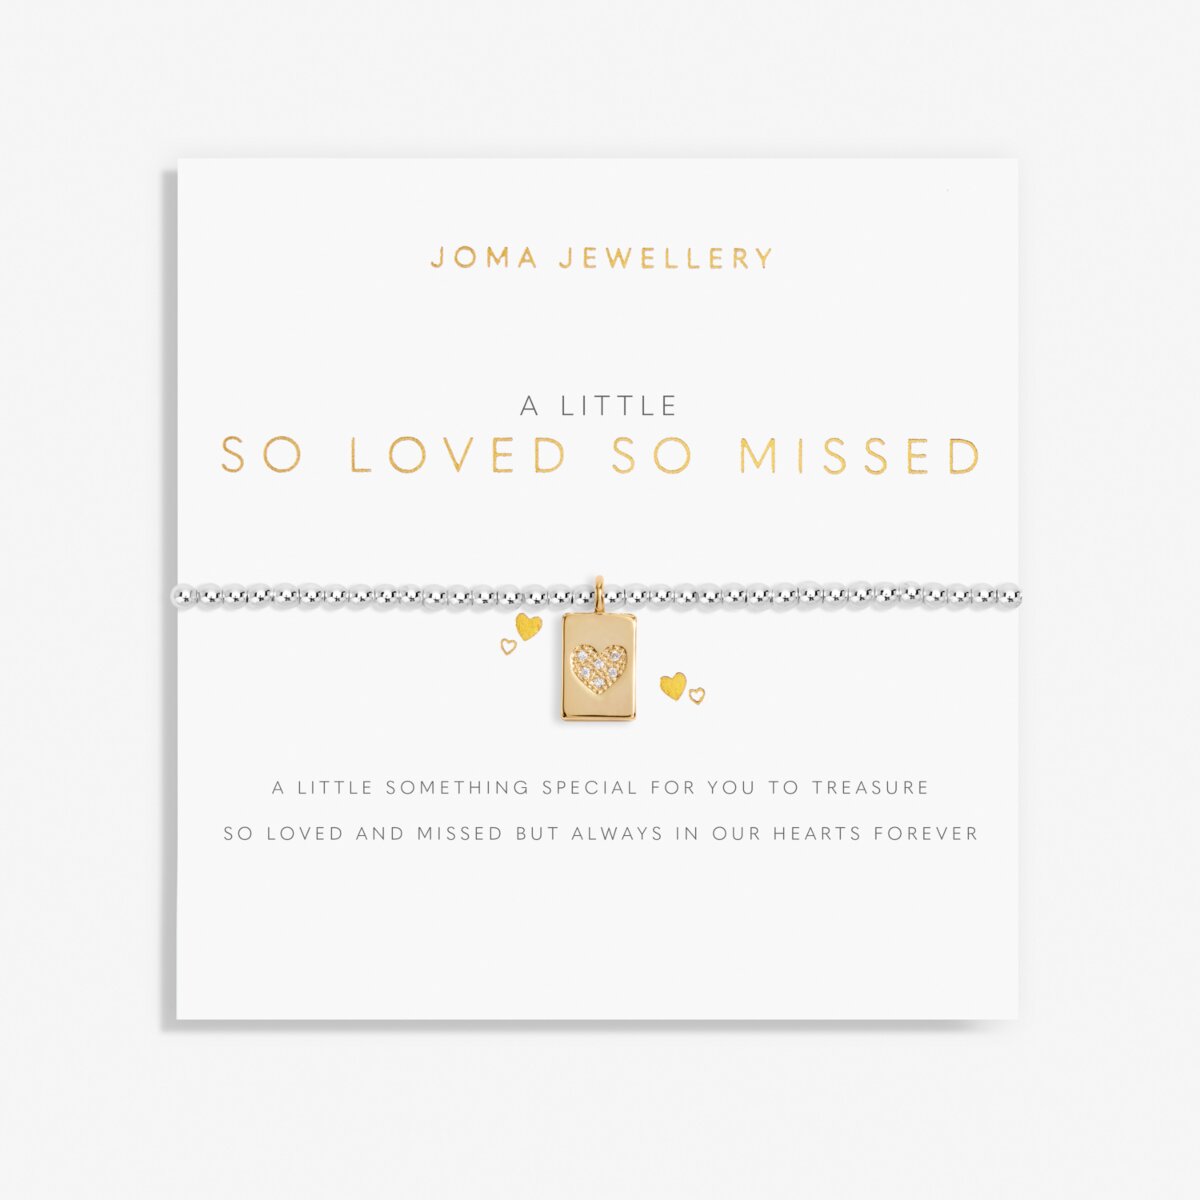 Joma Jewellery - A little So loved, so missed 6077